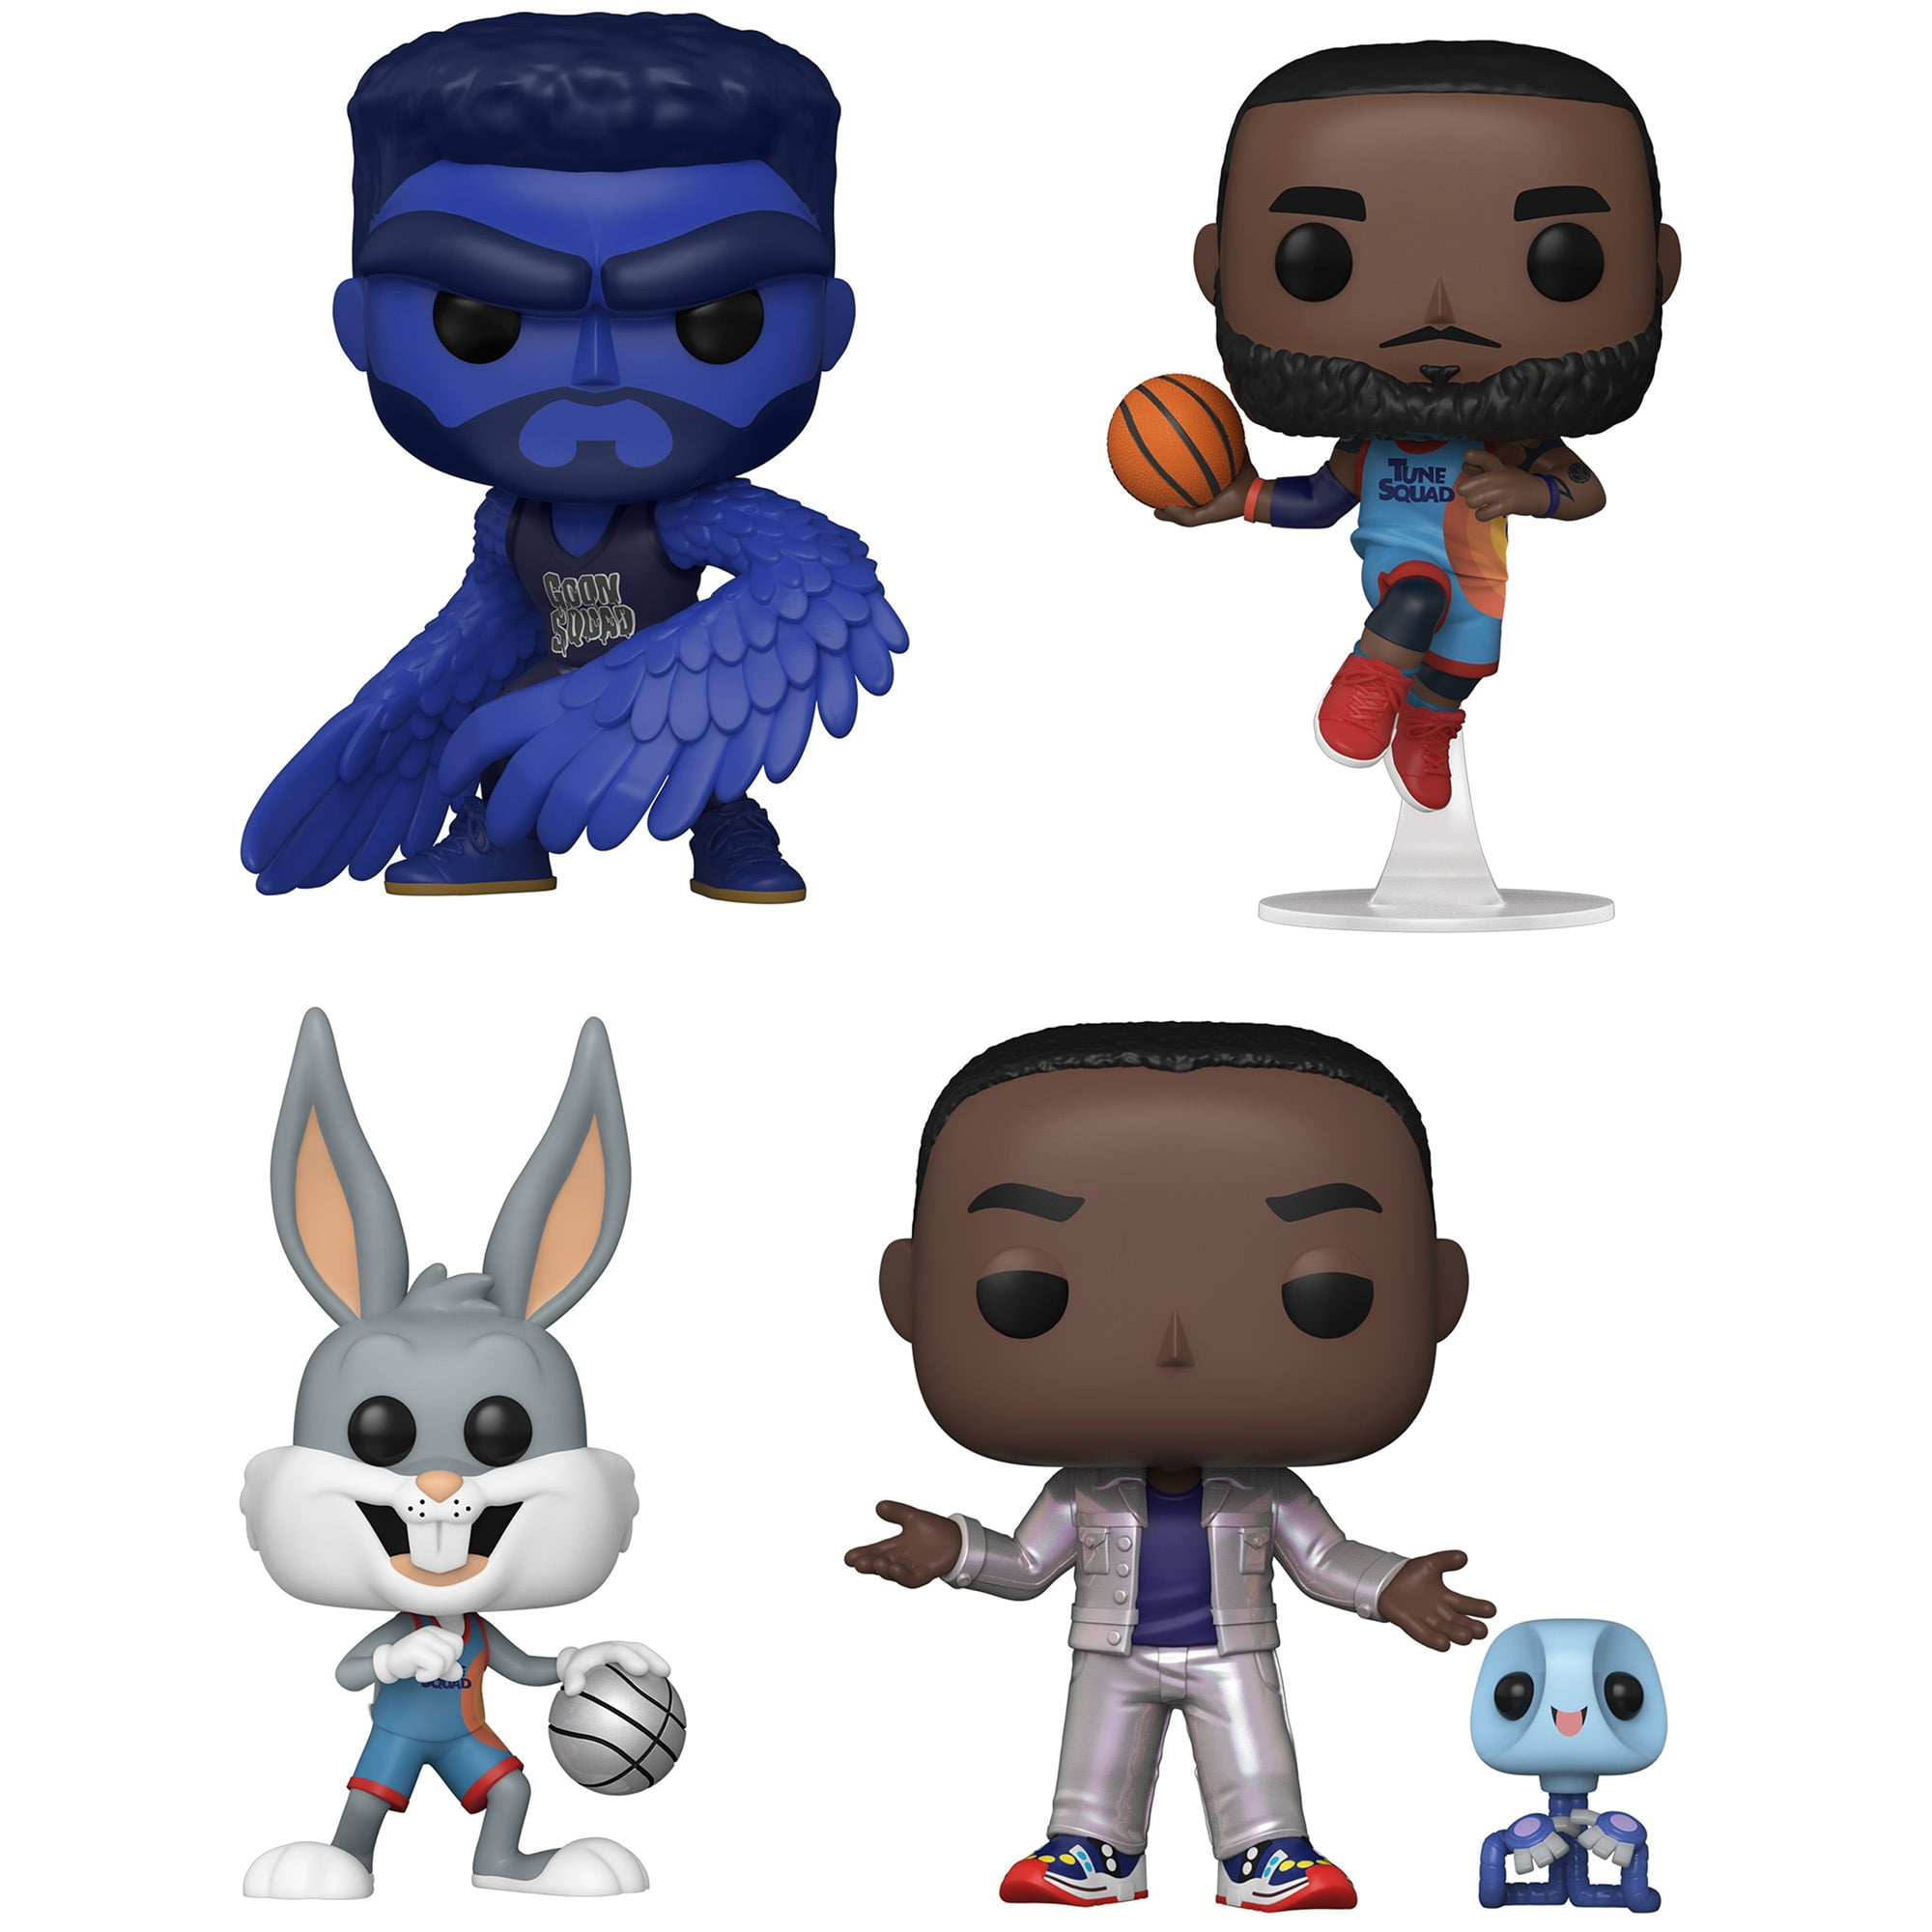  Funko POP Movies: Space Jam 2 - Lebron Leaping